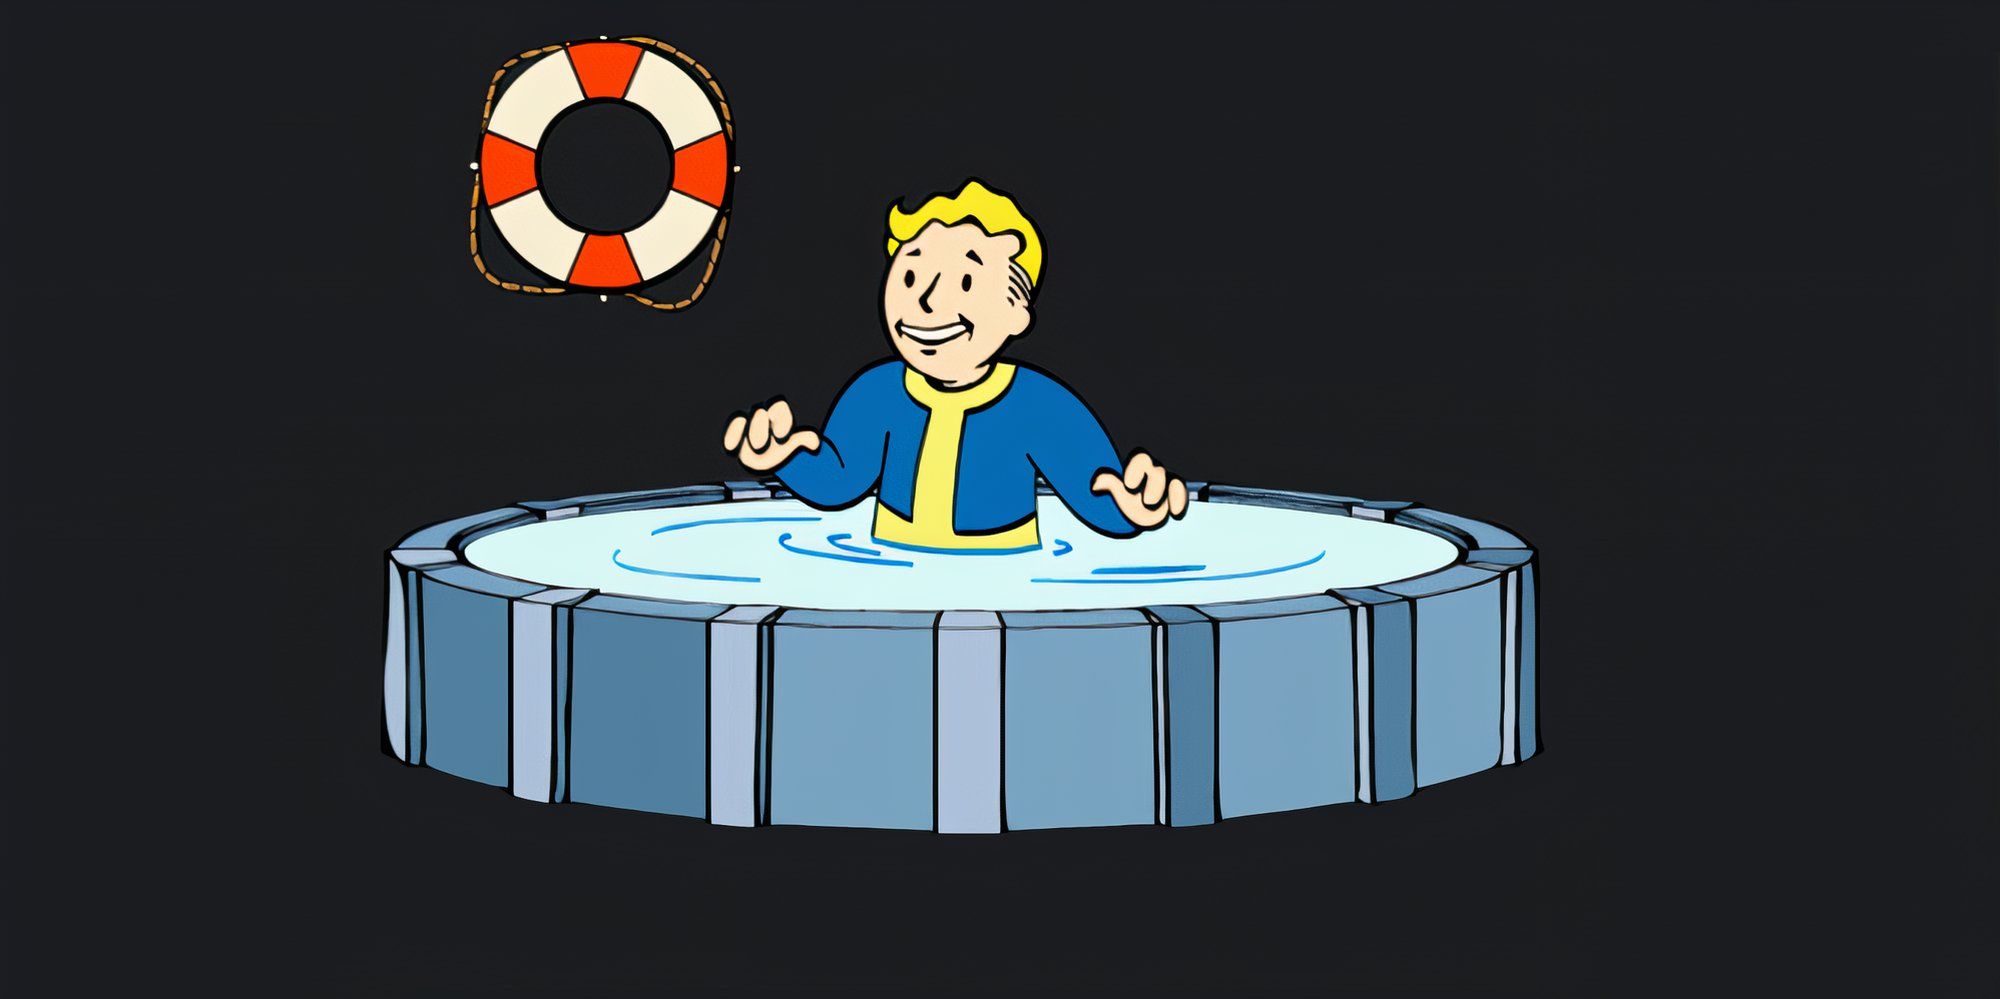 Vault Boy stands in a shallow pool with a smile